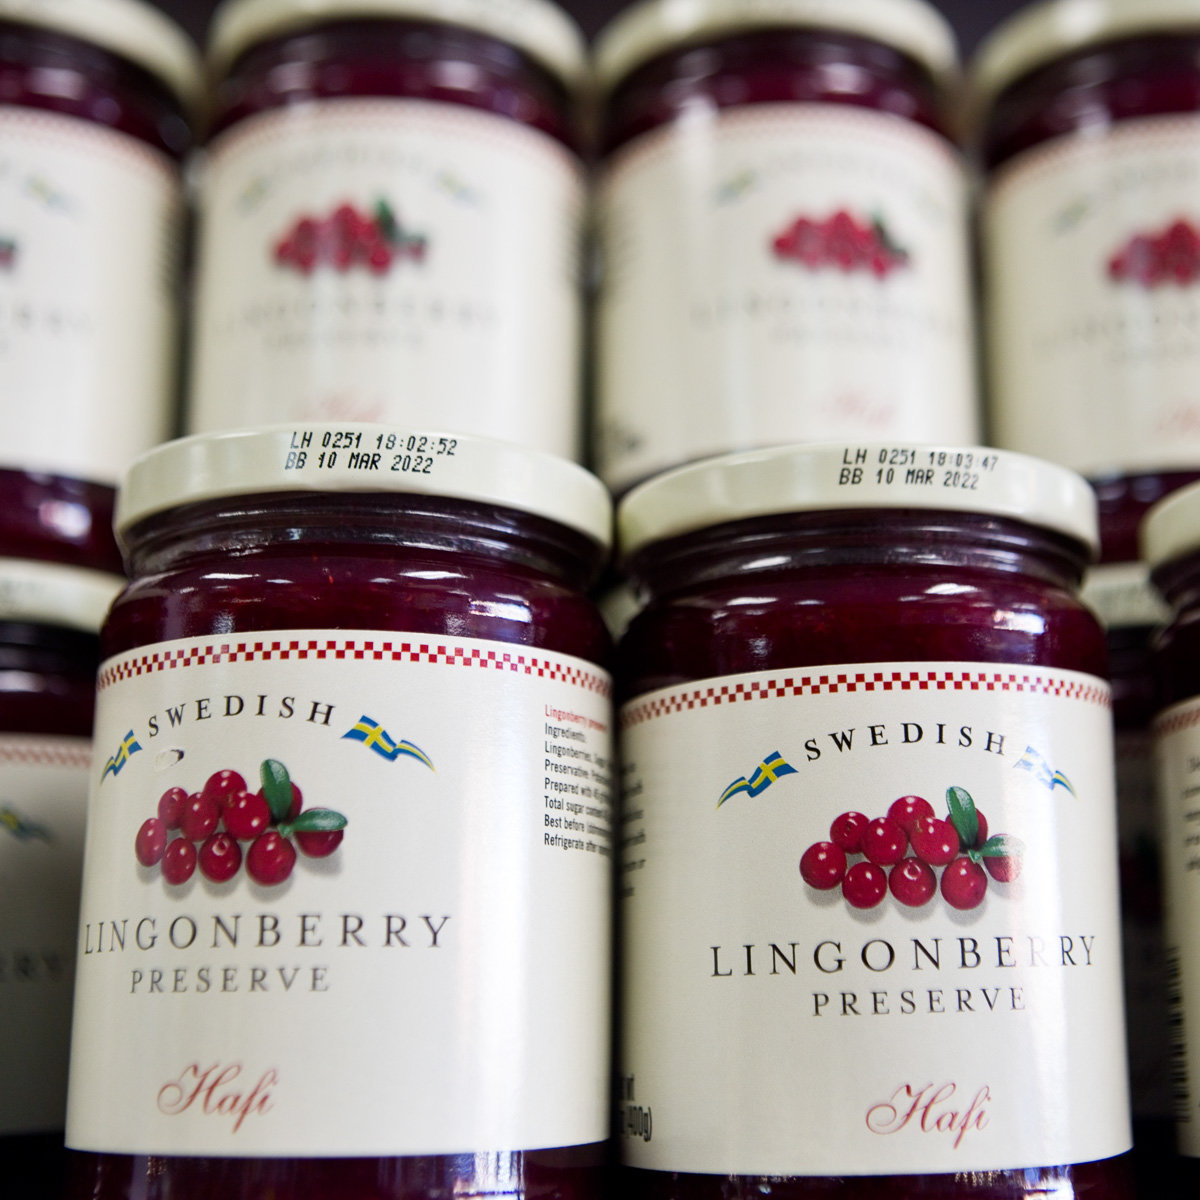 Ingebretsen’s Scandinavian Gifts and Foods shop sells a variety of food items, including lingonberry preserves, as well as gifts. (Photos by Margie O’Loughlin)